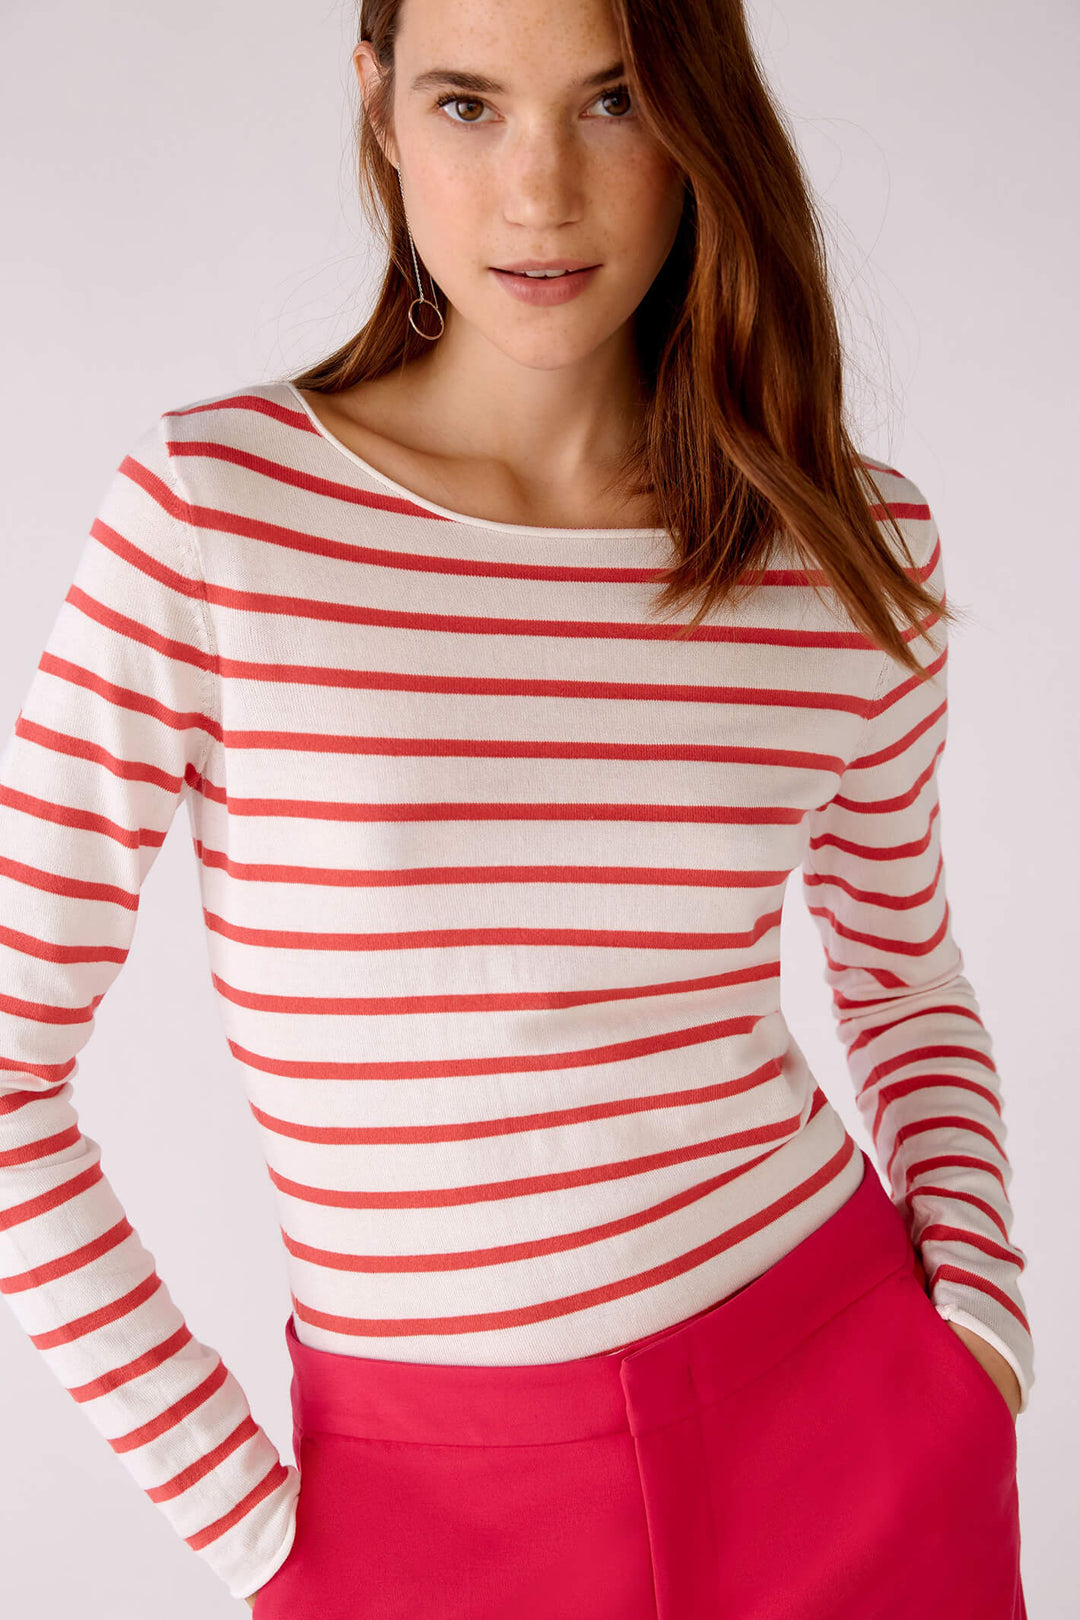 Oui 78778 Pink White Striped Wide Neck Jumper - Dotique Chesterfield